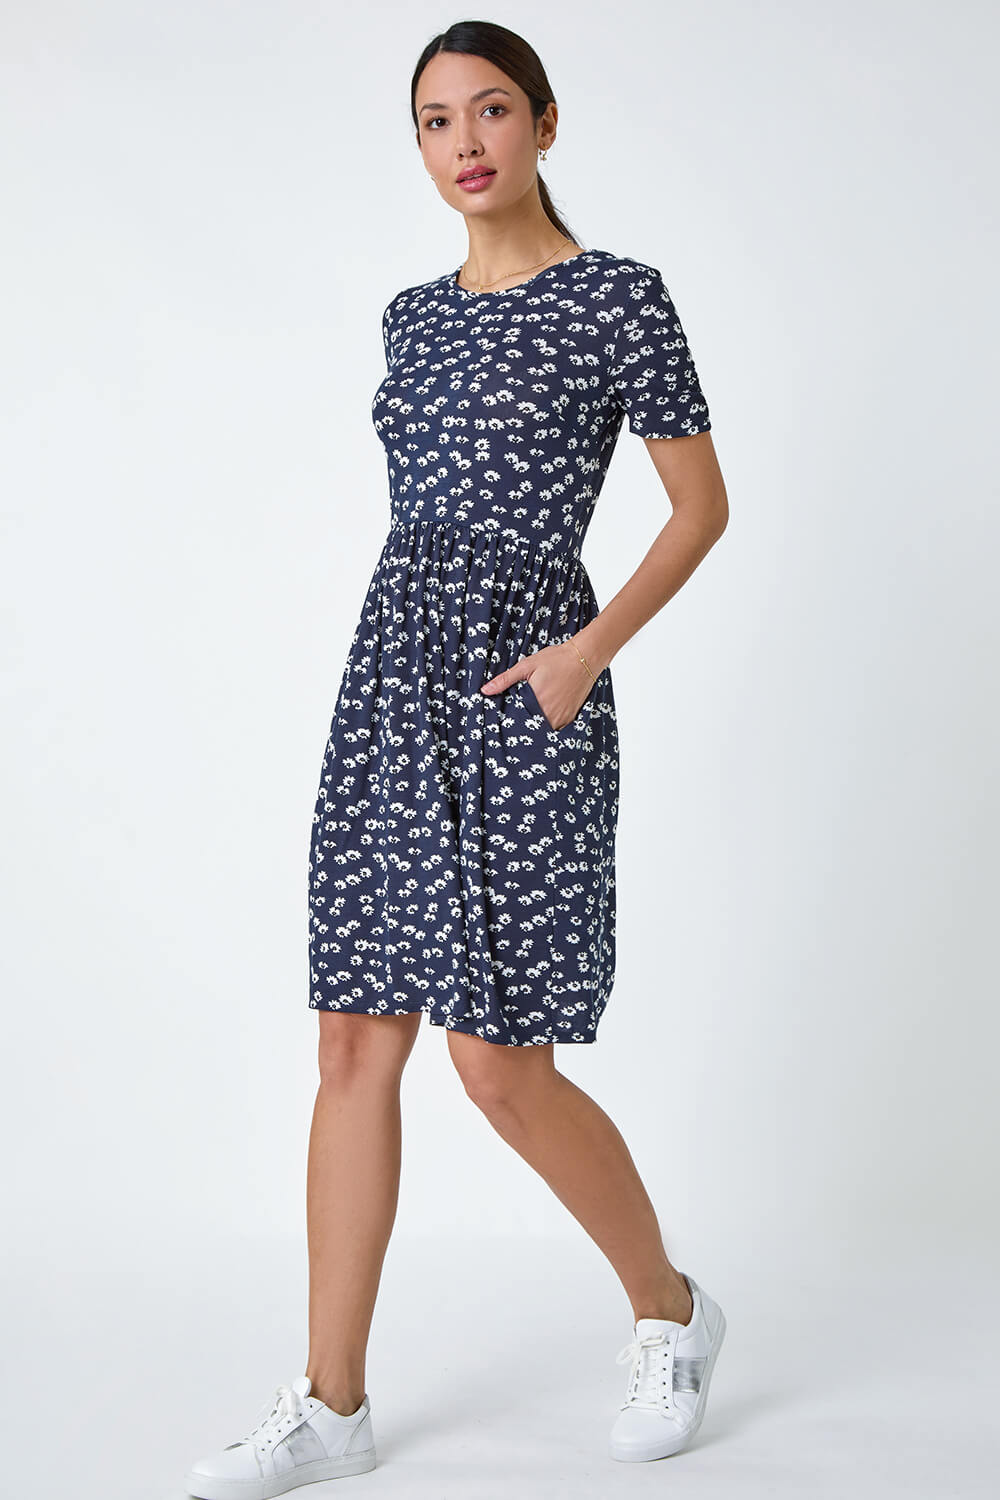 Navy  Ditsy Floral Stretch Dress, Image 2 of 5